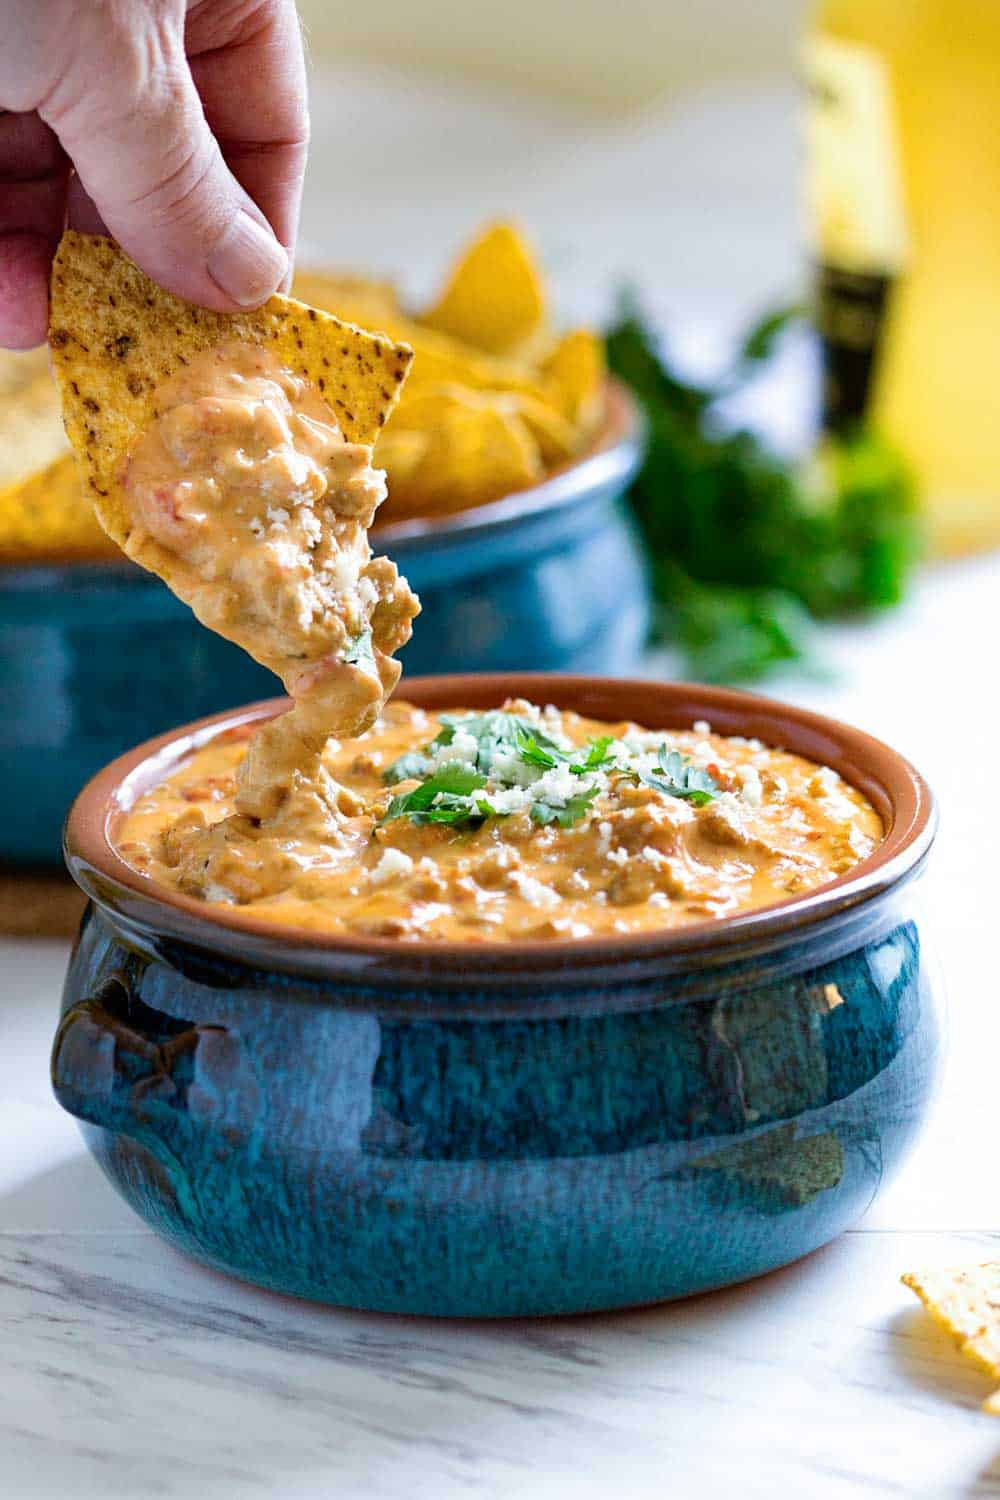 dipping tortilla chips into queso dip made from scratch in a blue crock